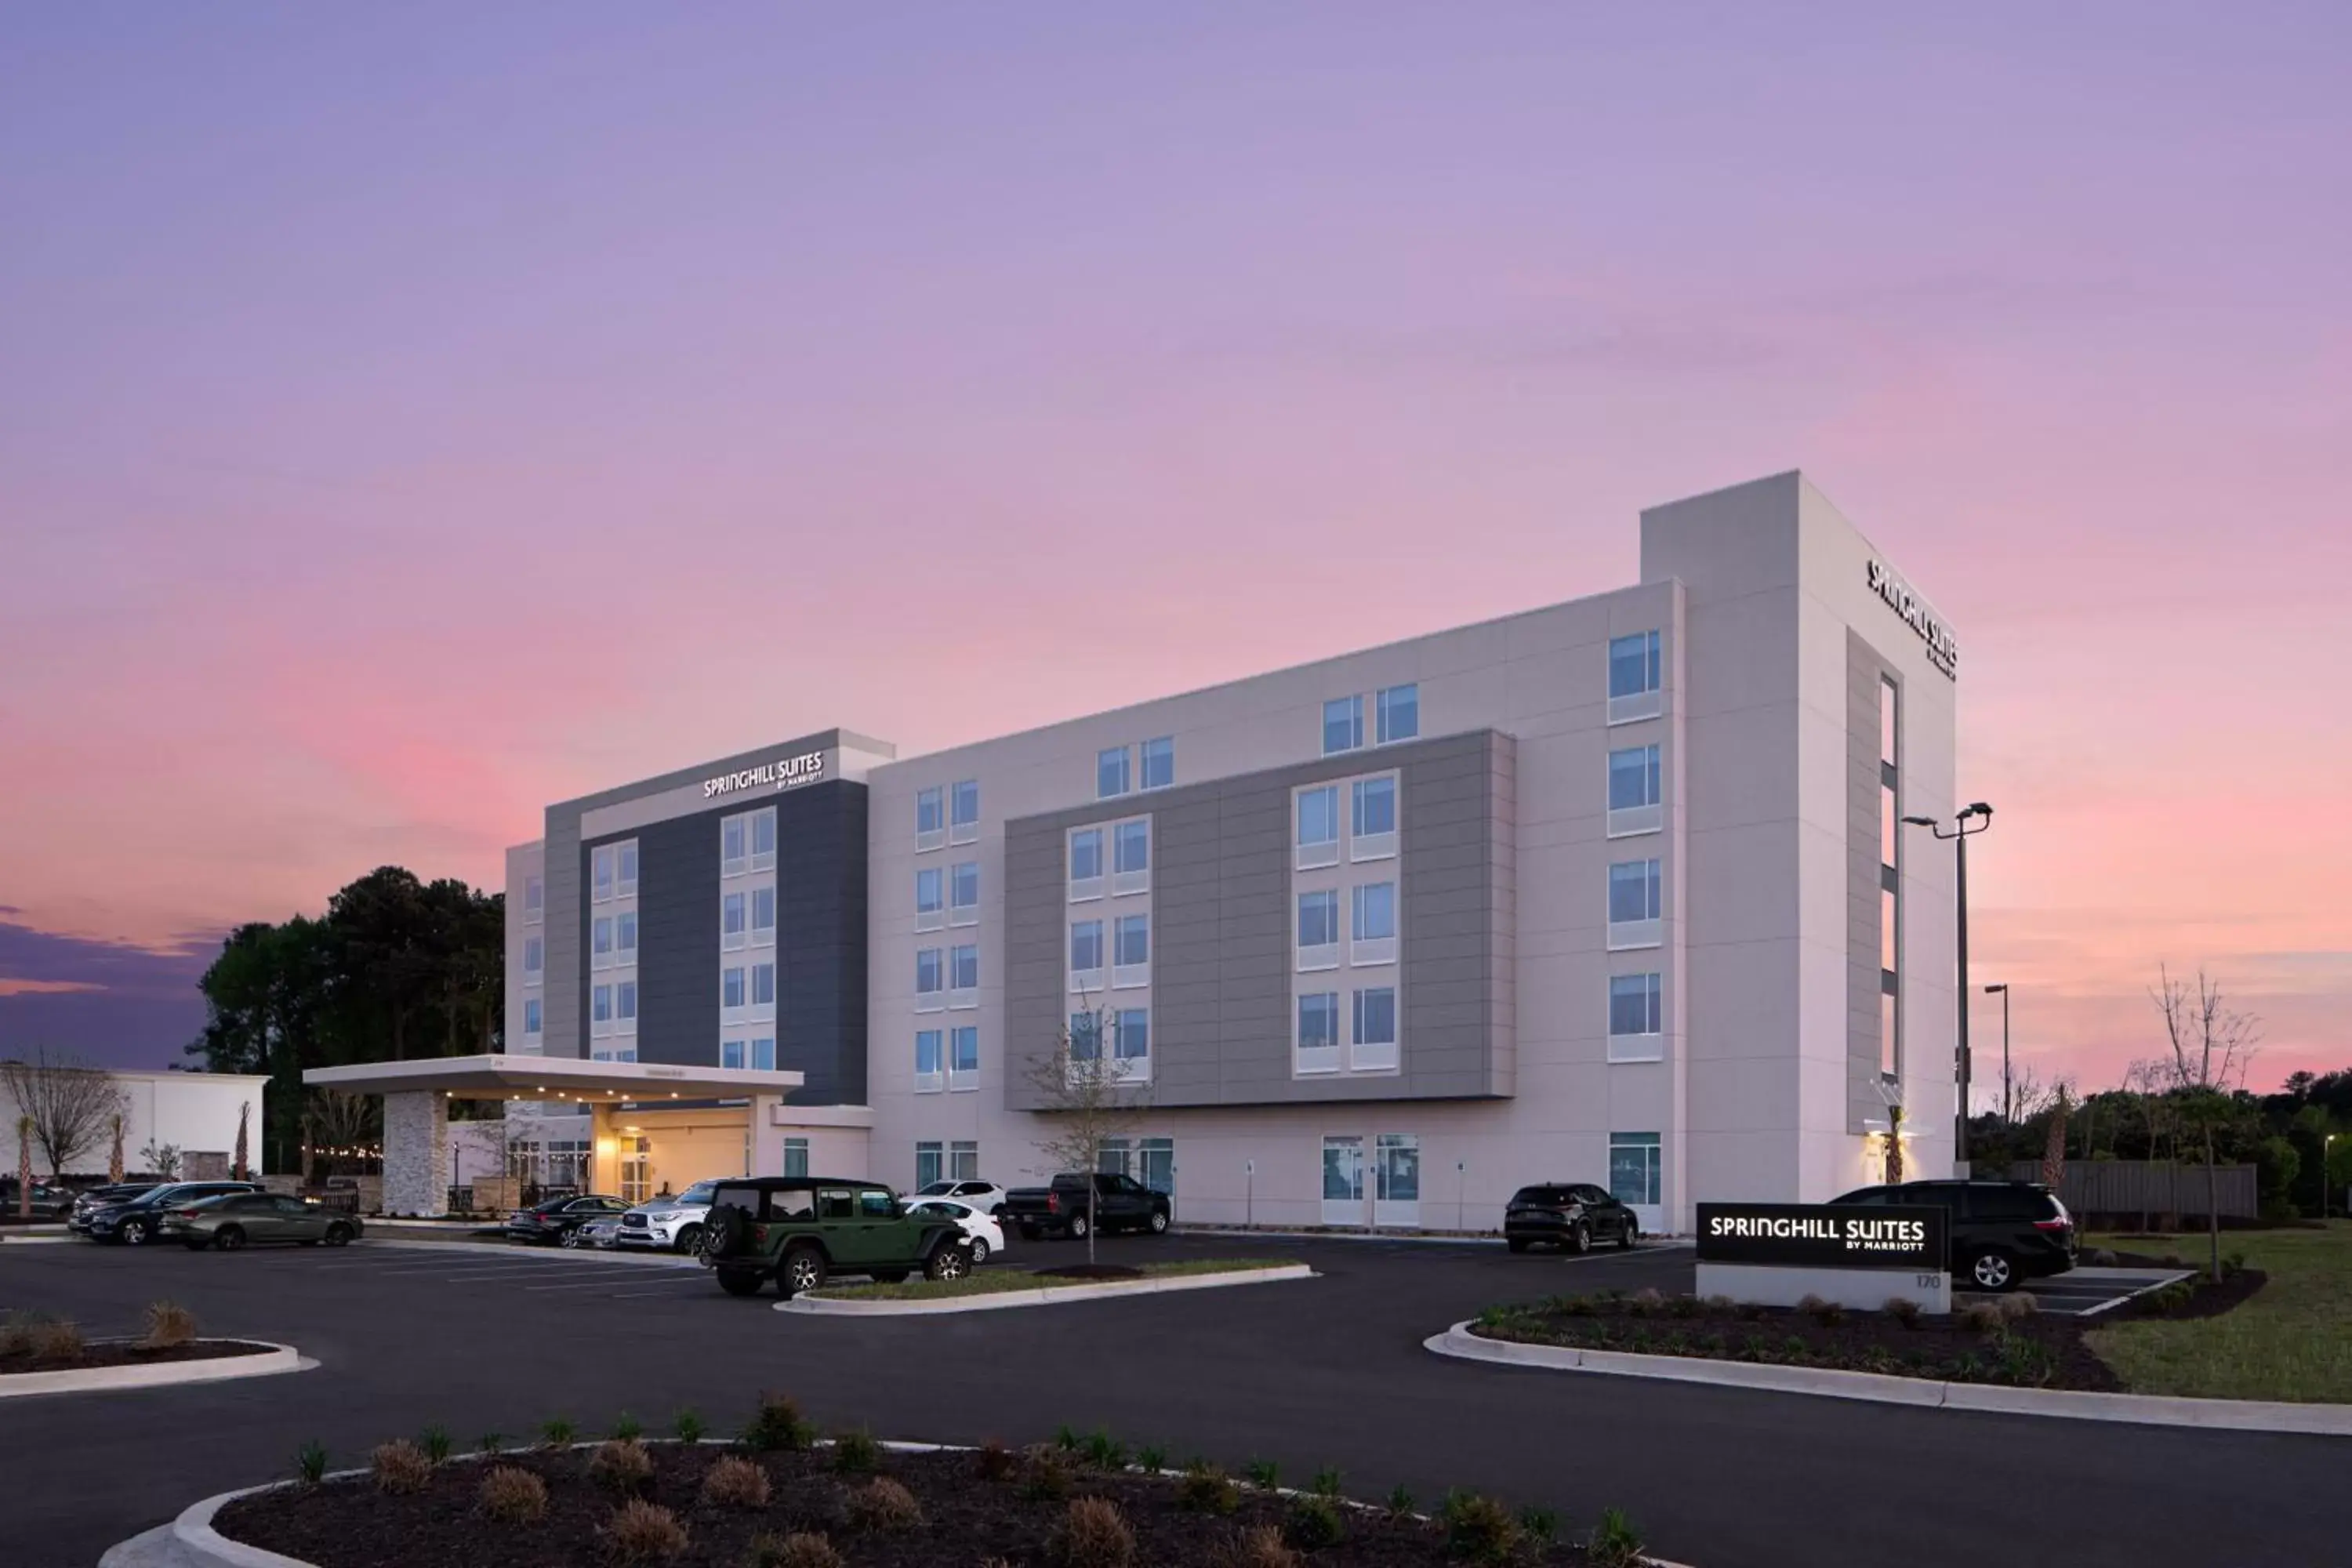 Property Building in SpringHill Suites by Marriott Columbia near Fort Jackson